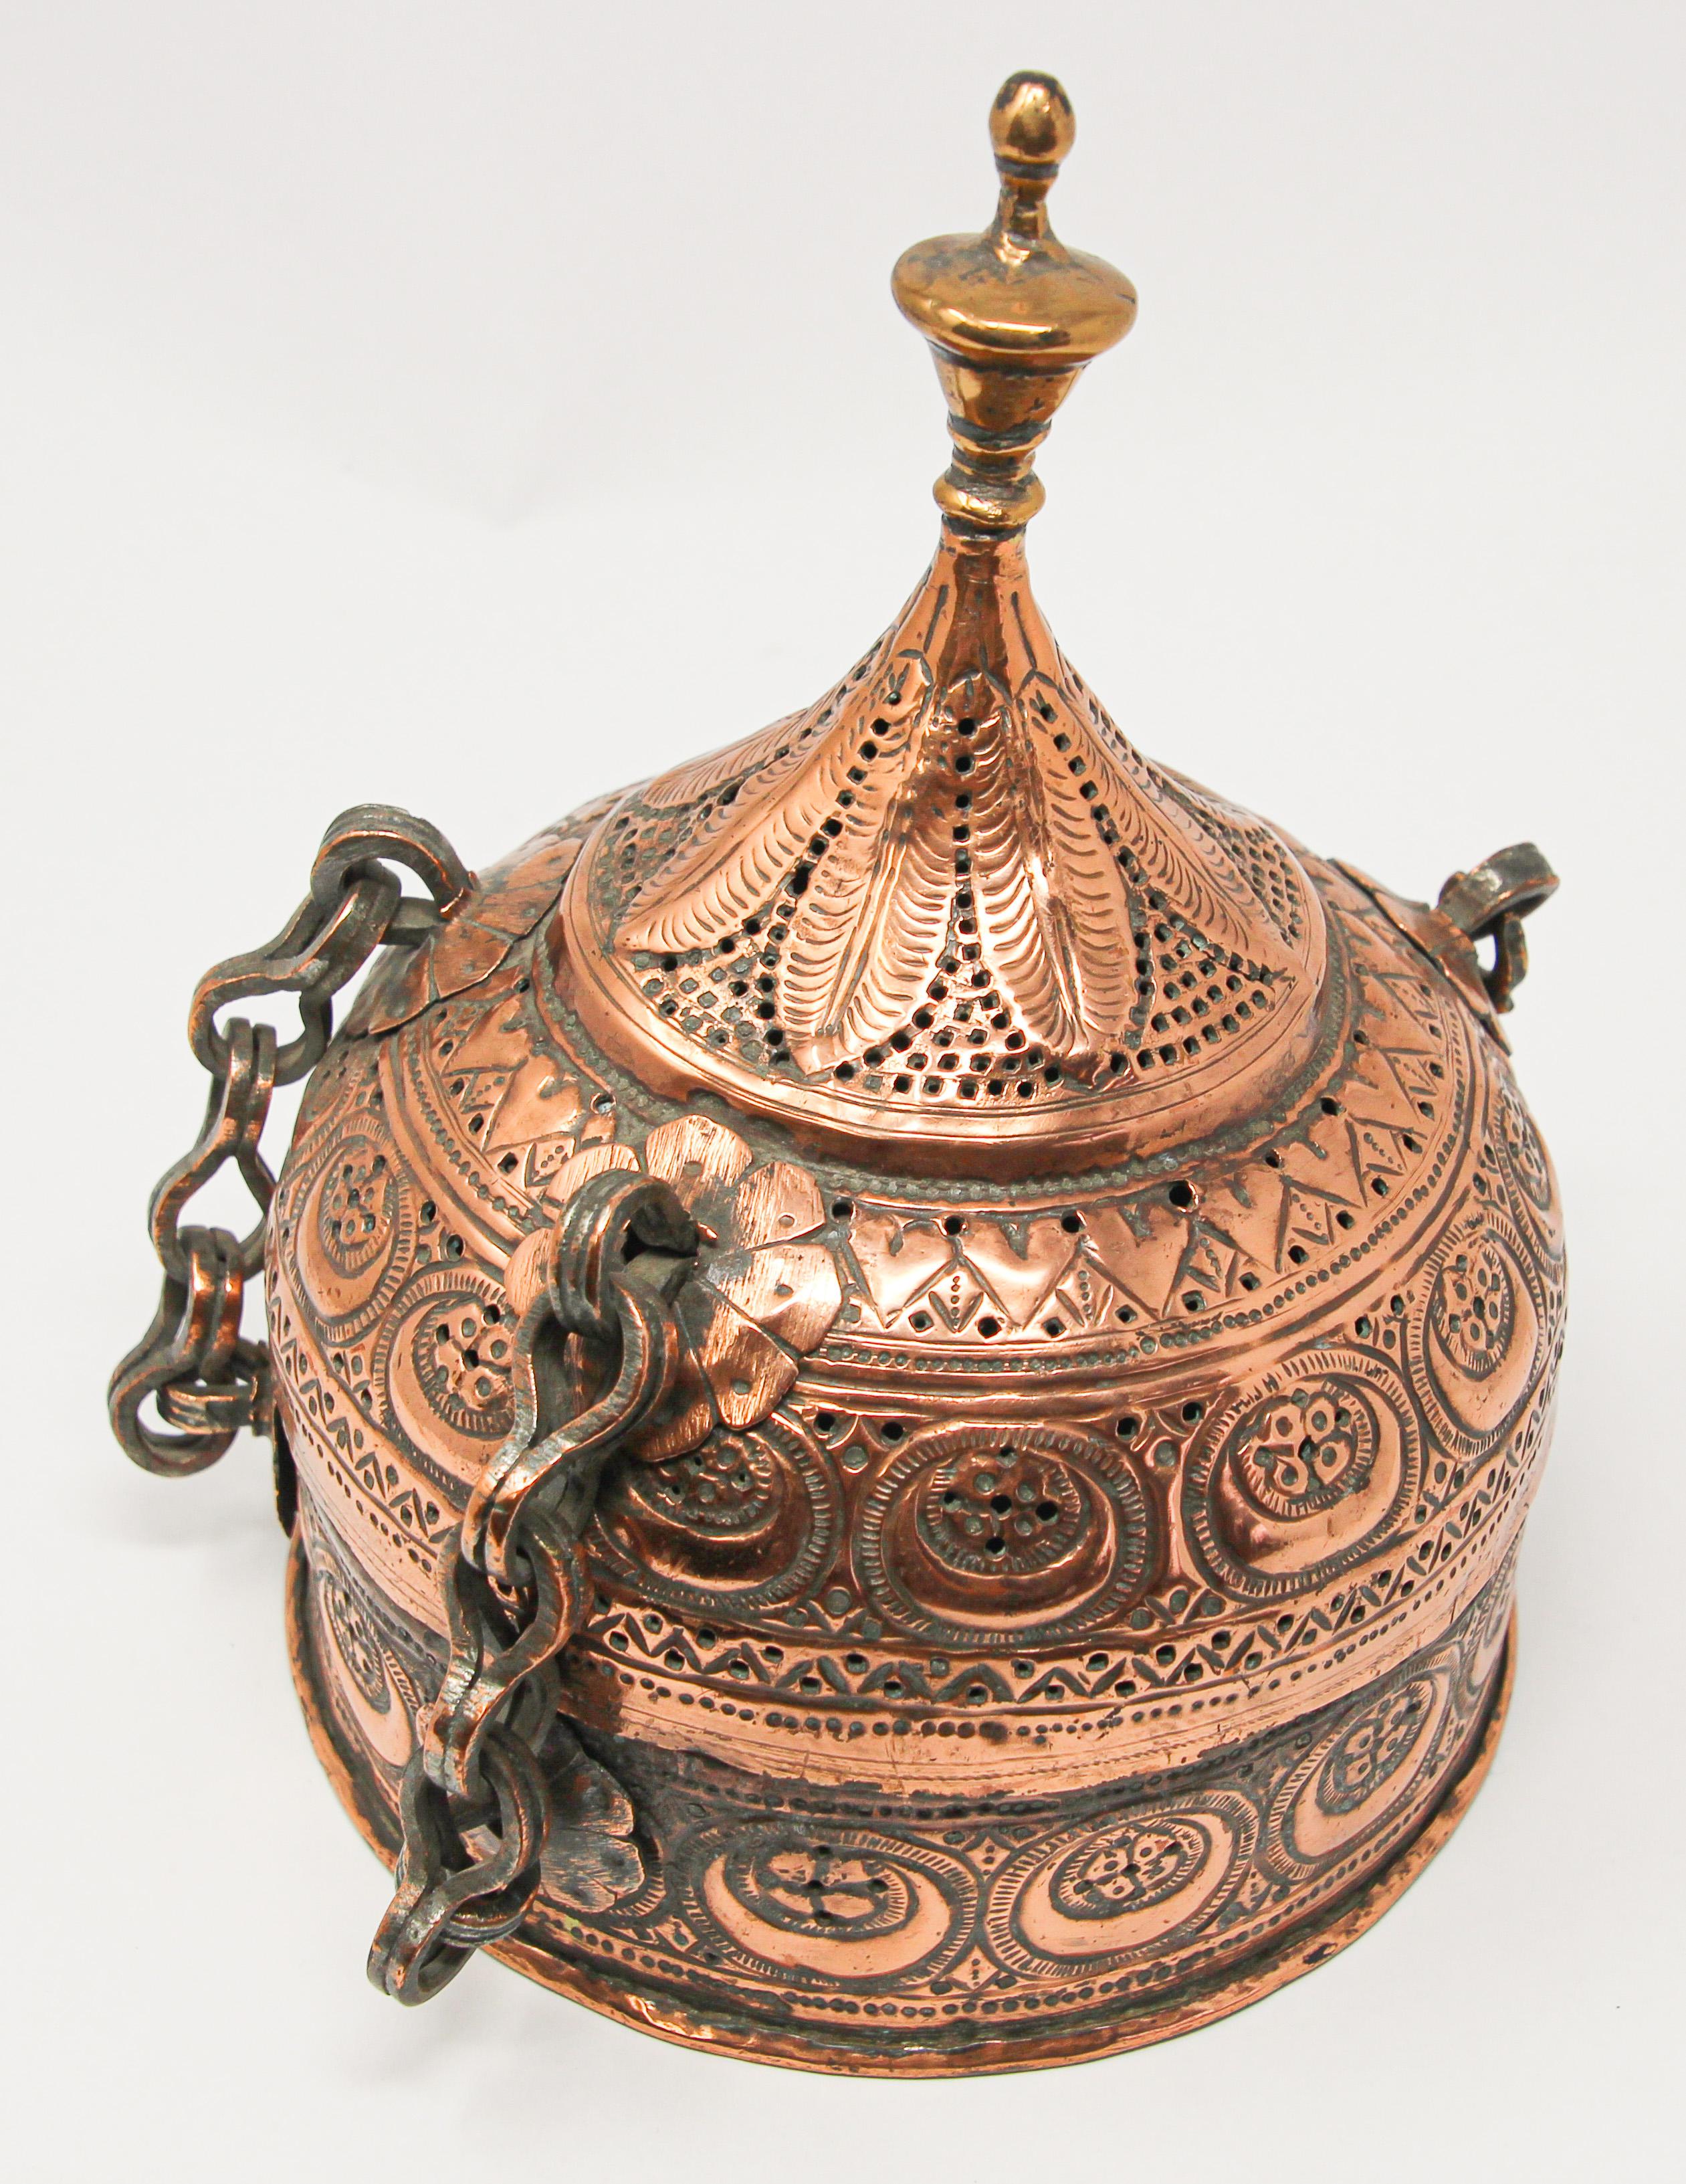 Rajasthani Mughal Decorative Copper Lidded Betel Spice Pandan Caddy Box In Good Condition For Sale In North Hollywood, CA